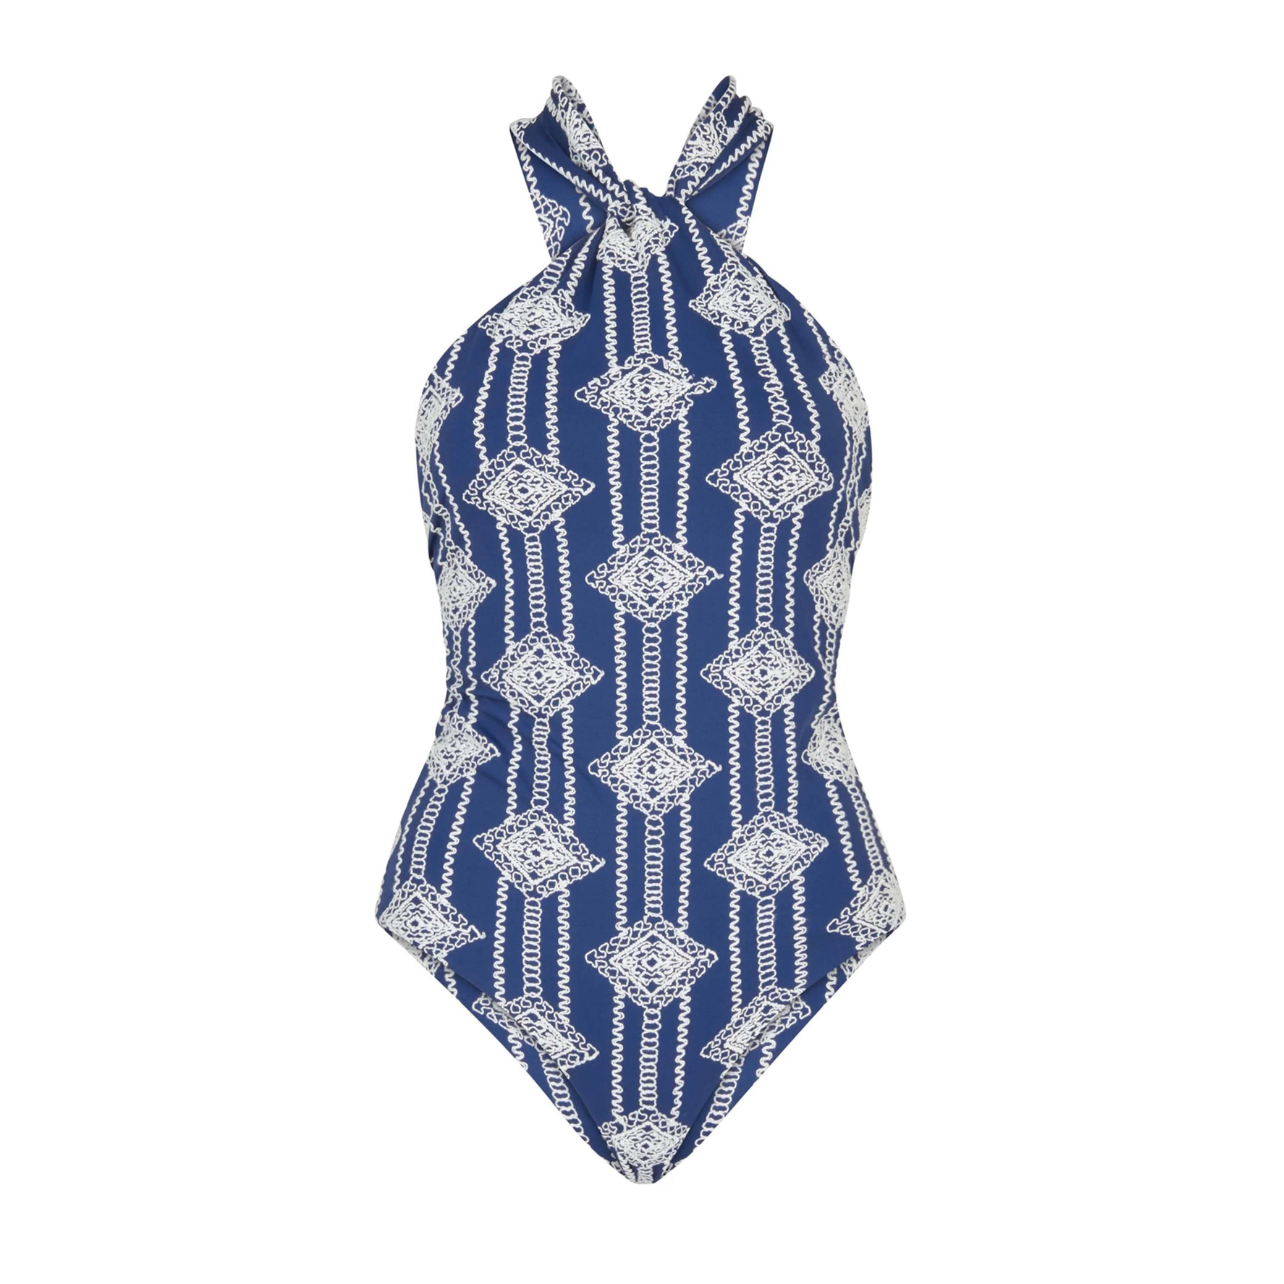 Silvia Tcherassi blue halter one-piece bathing suit with white embroidery